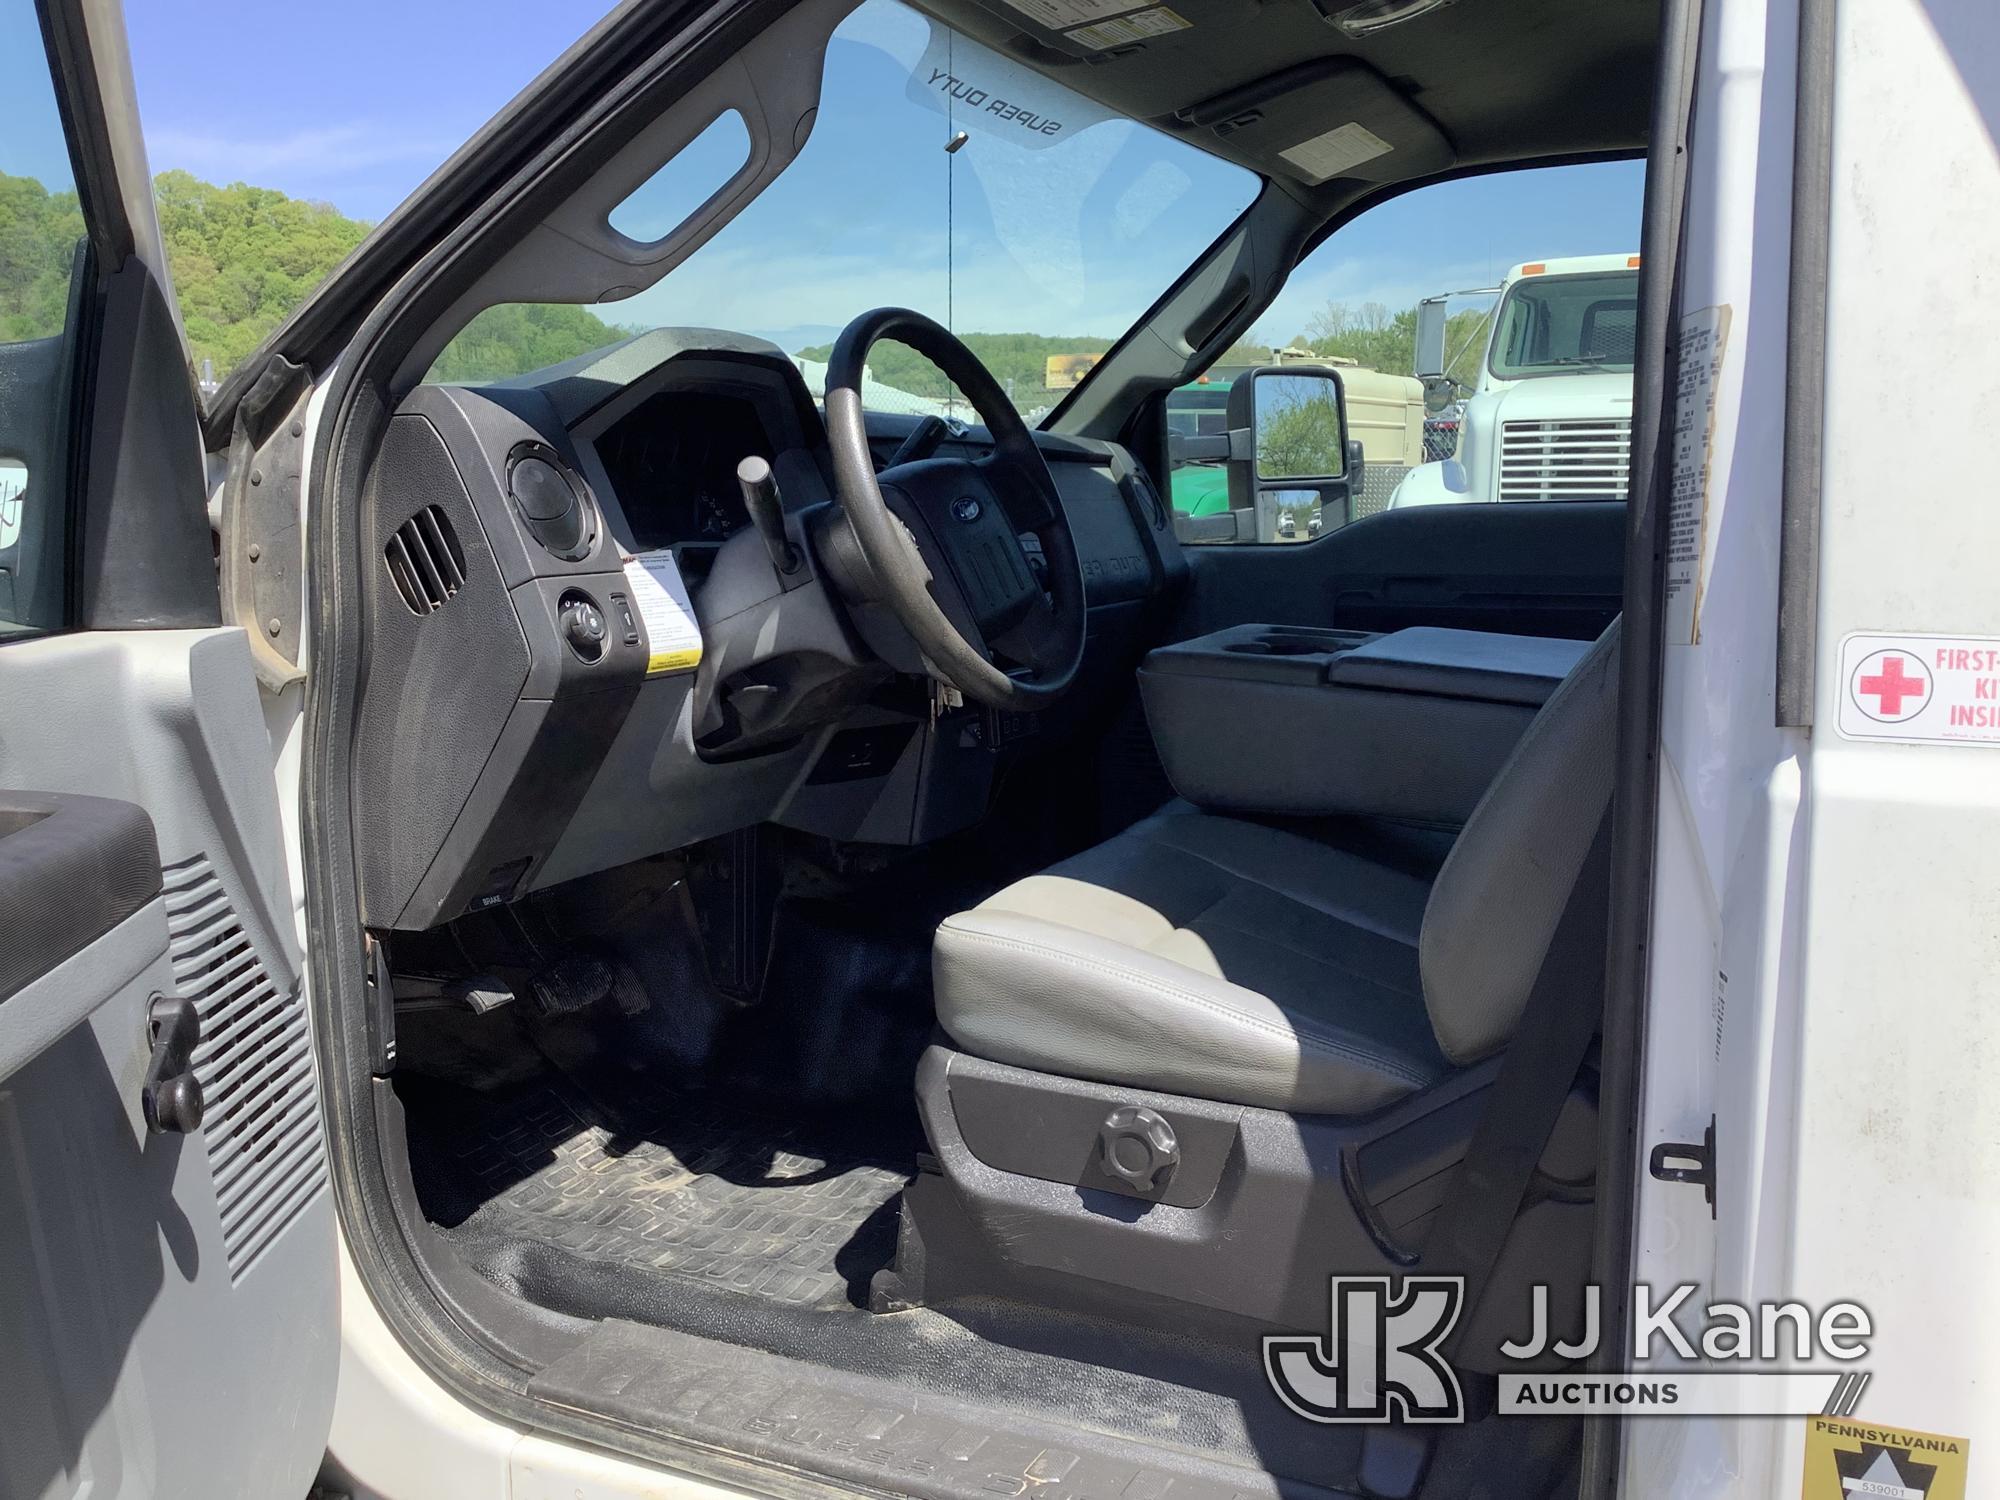 (Smock, PA) 2012 Ford F550 Enclosed High-Top Service Truck Runs & Moves, Check Engine Light On, PTO